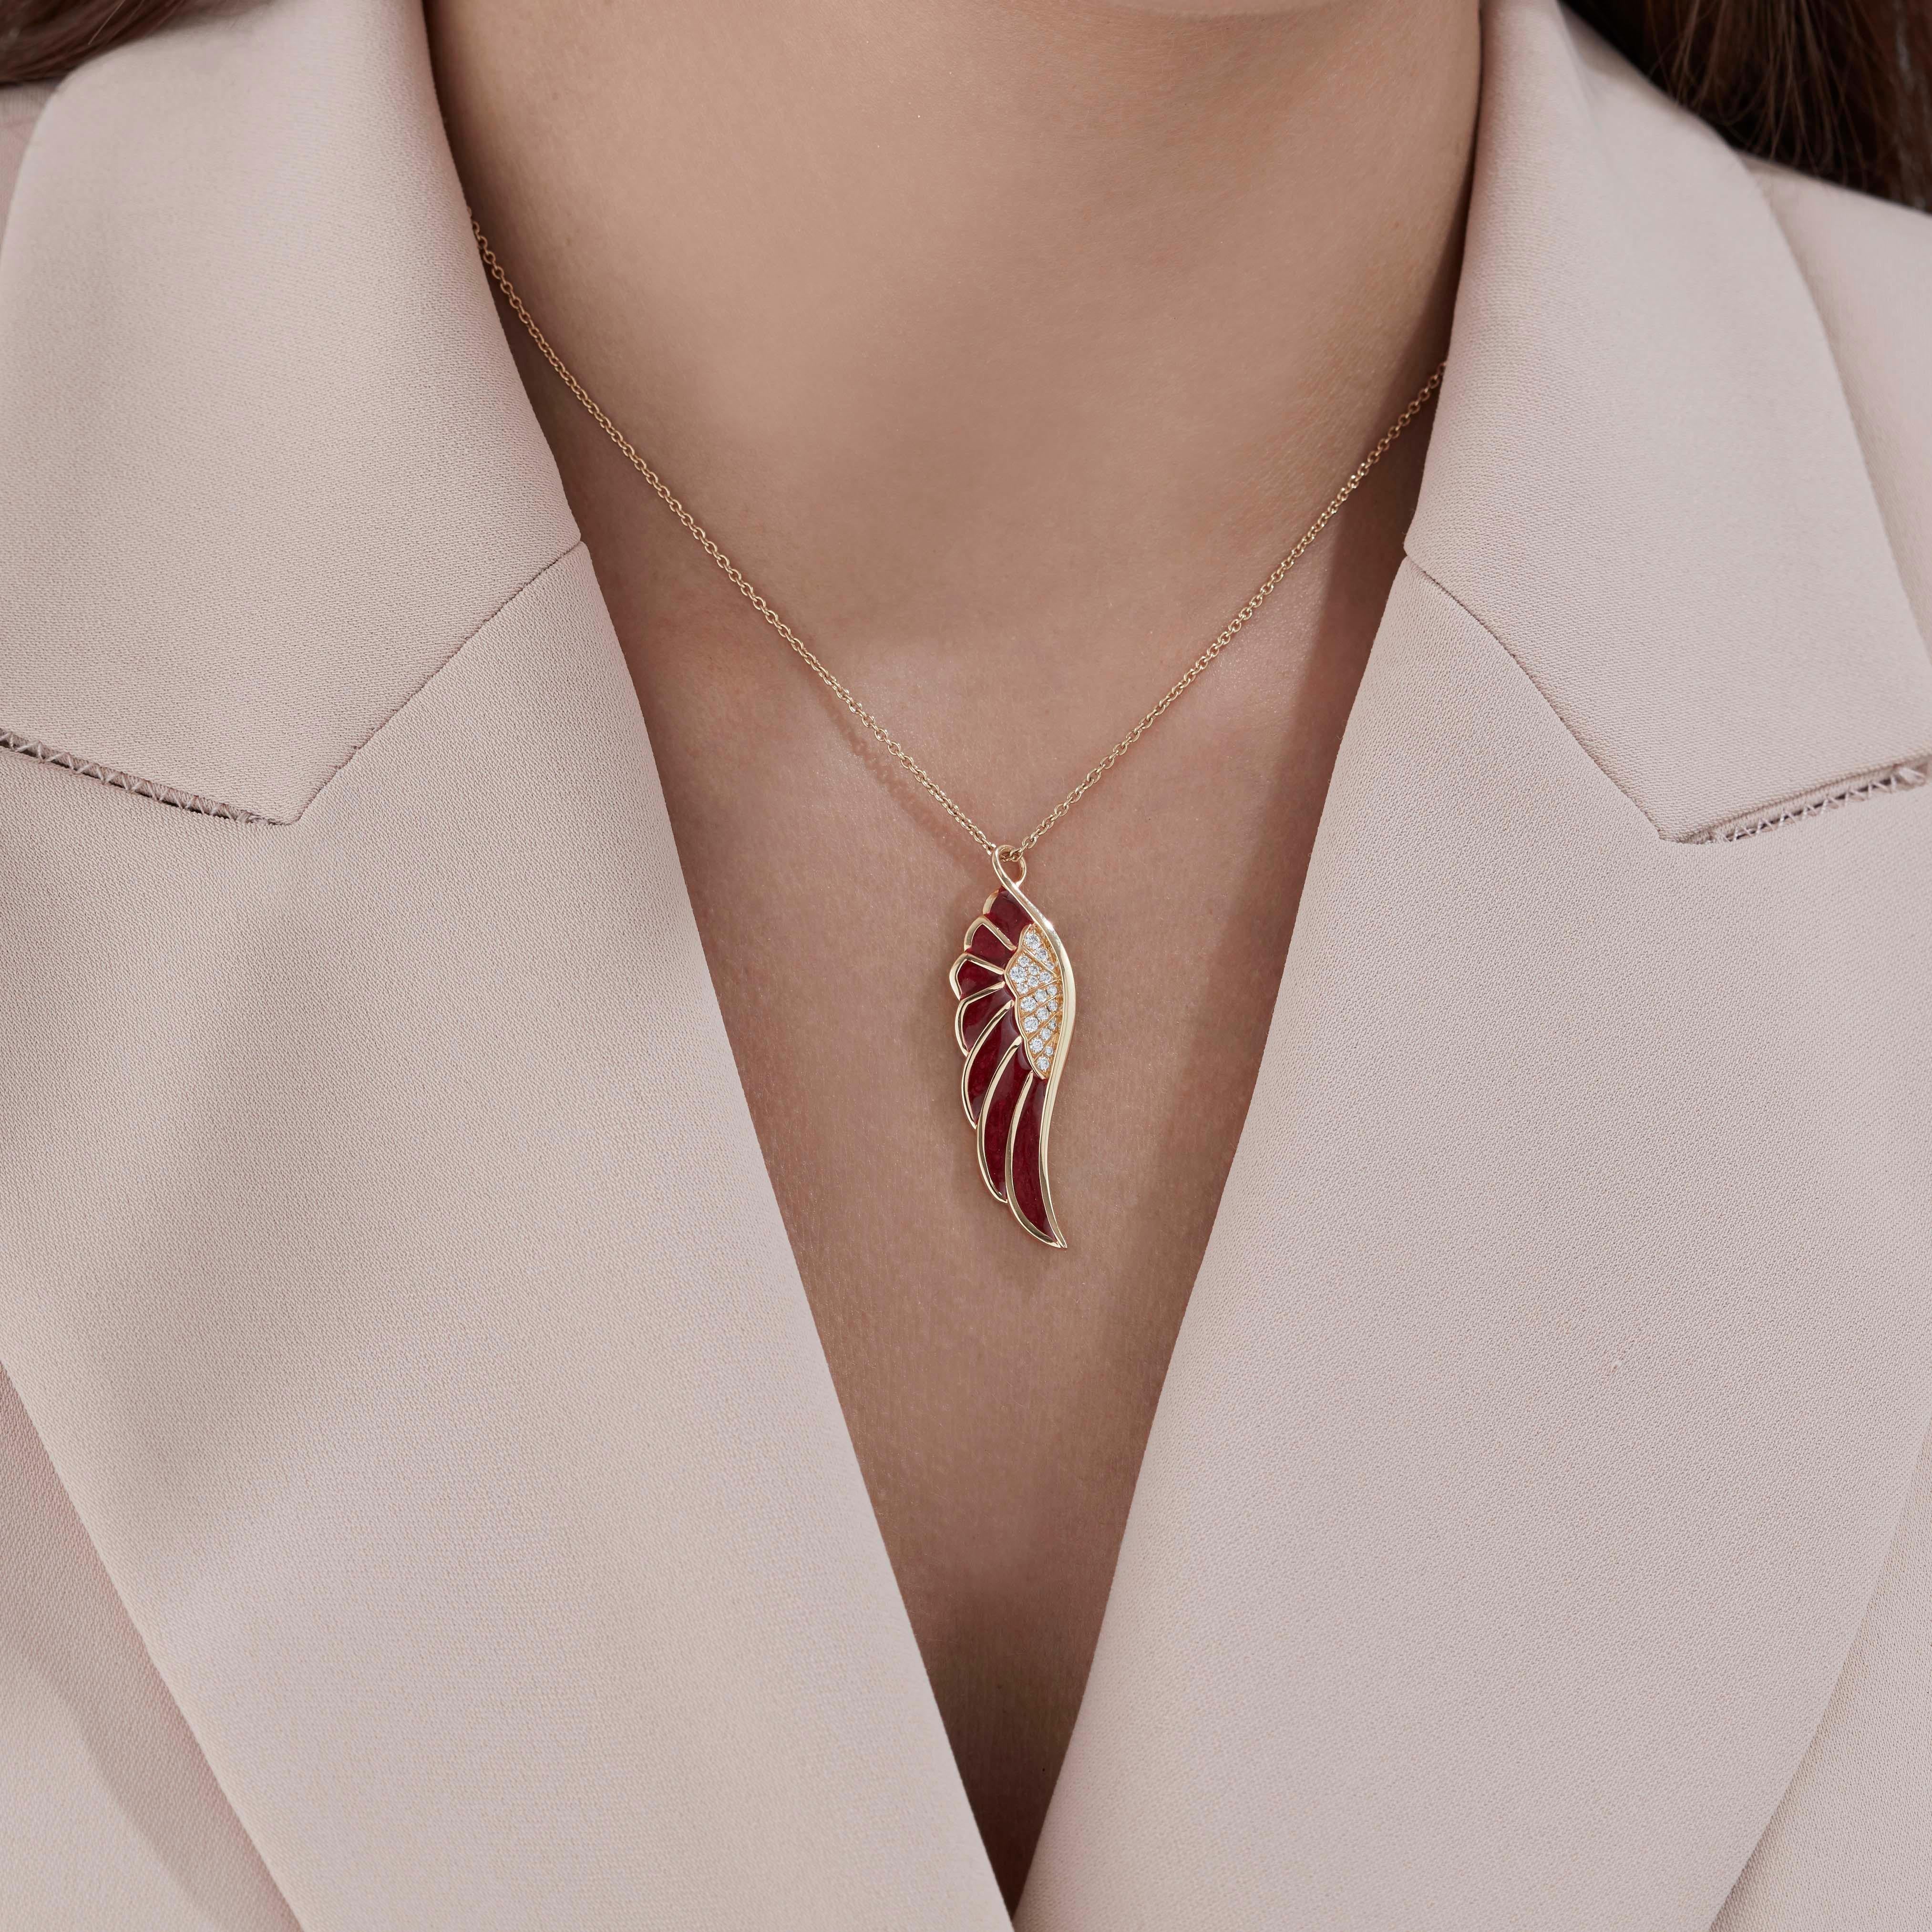 A House of Garrard 18 karat yellow gold medium pendant from the 'Wings Reflection' collection, set with round white diamonds and 'Autumn' coloured enamel. 

20 round white diamonds weighing: 0.20cts 

The House of Garrard is the longest serving